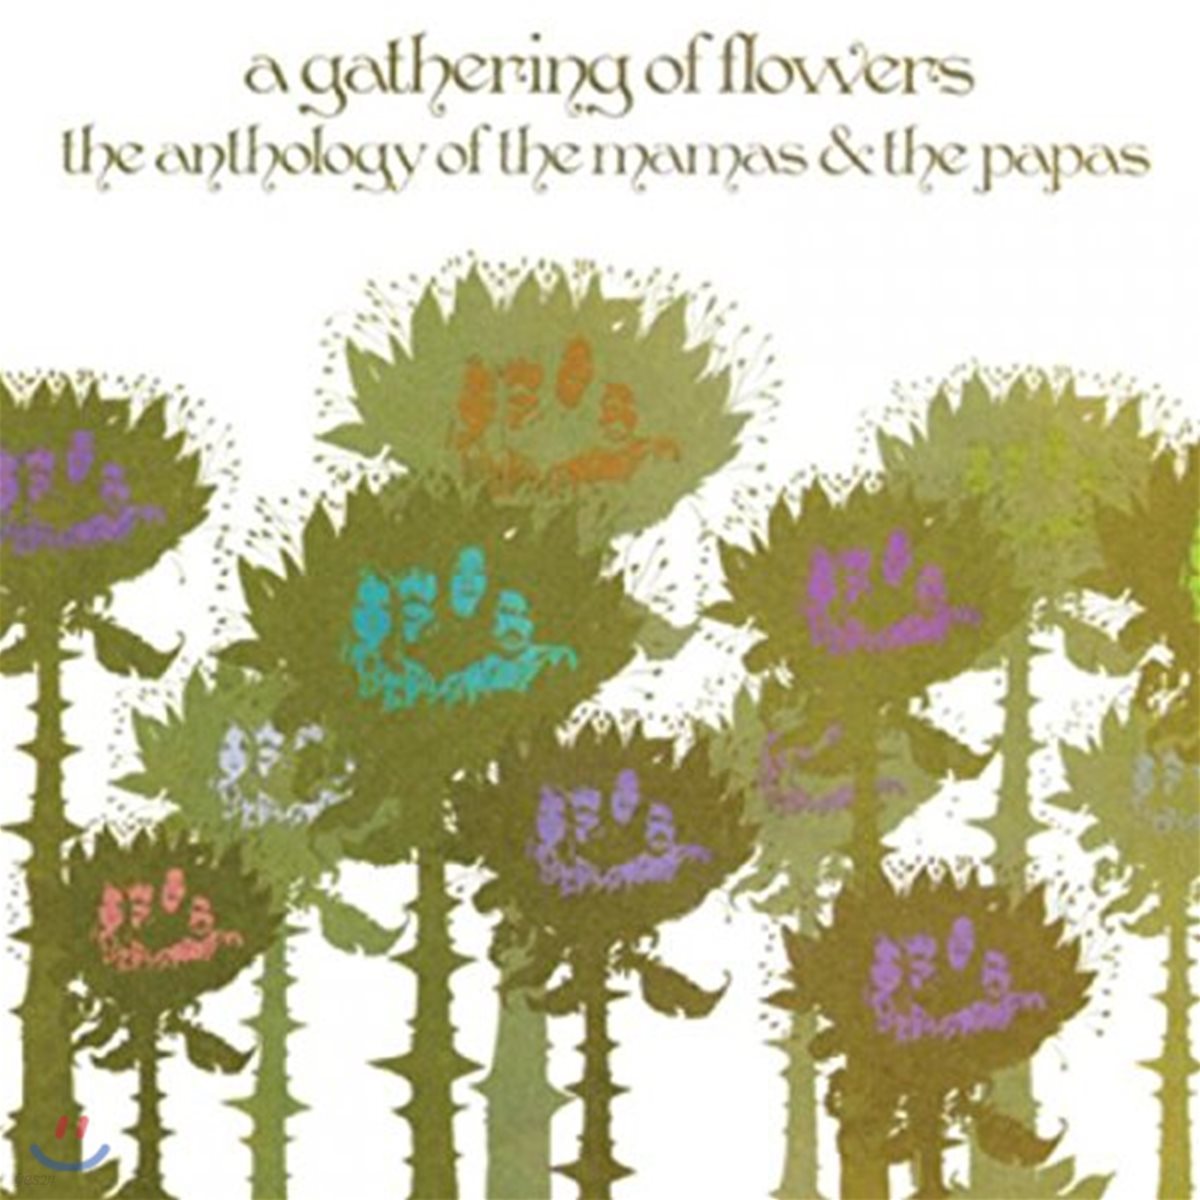 The Mamas &amp; The Papas (마마스 앤 파파스) - A Gathering of Flowers: The Anthology of the Mamas and the Papas